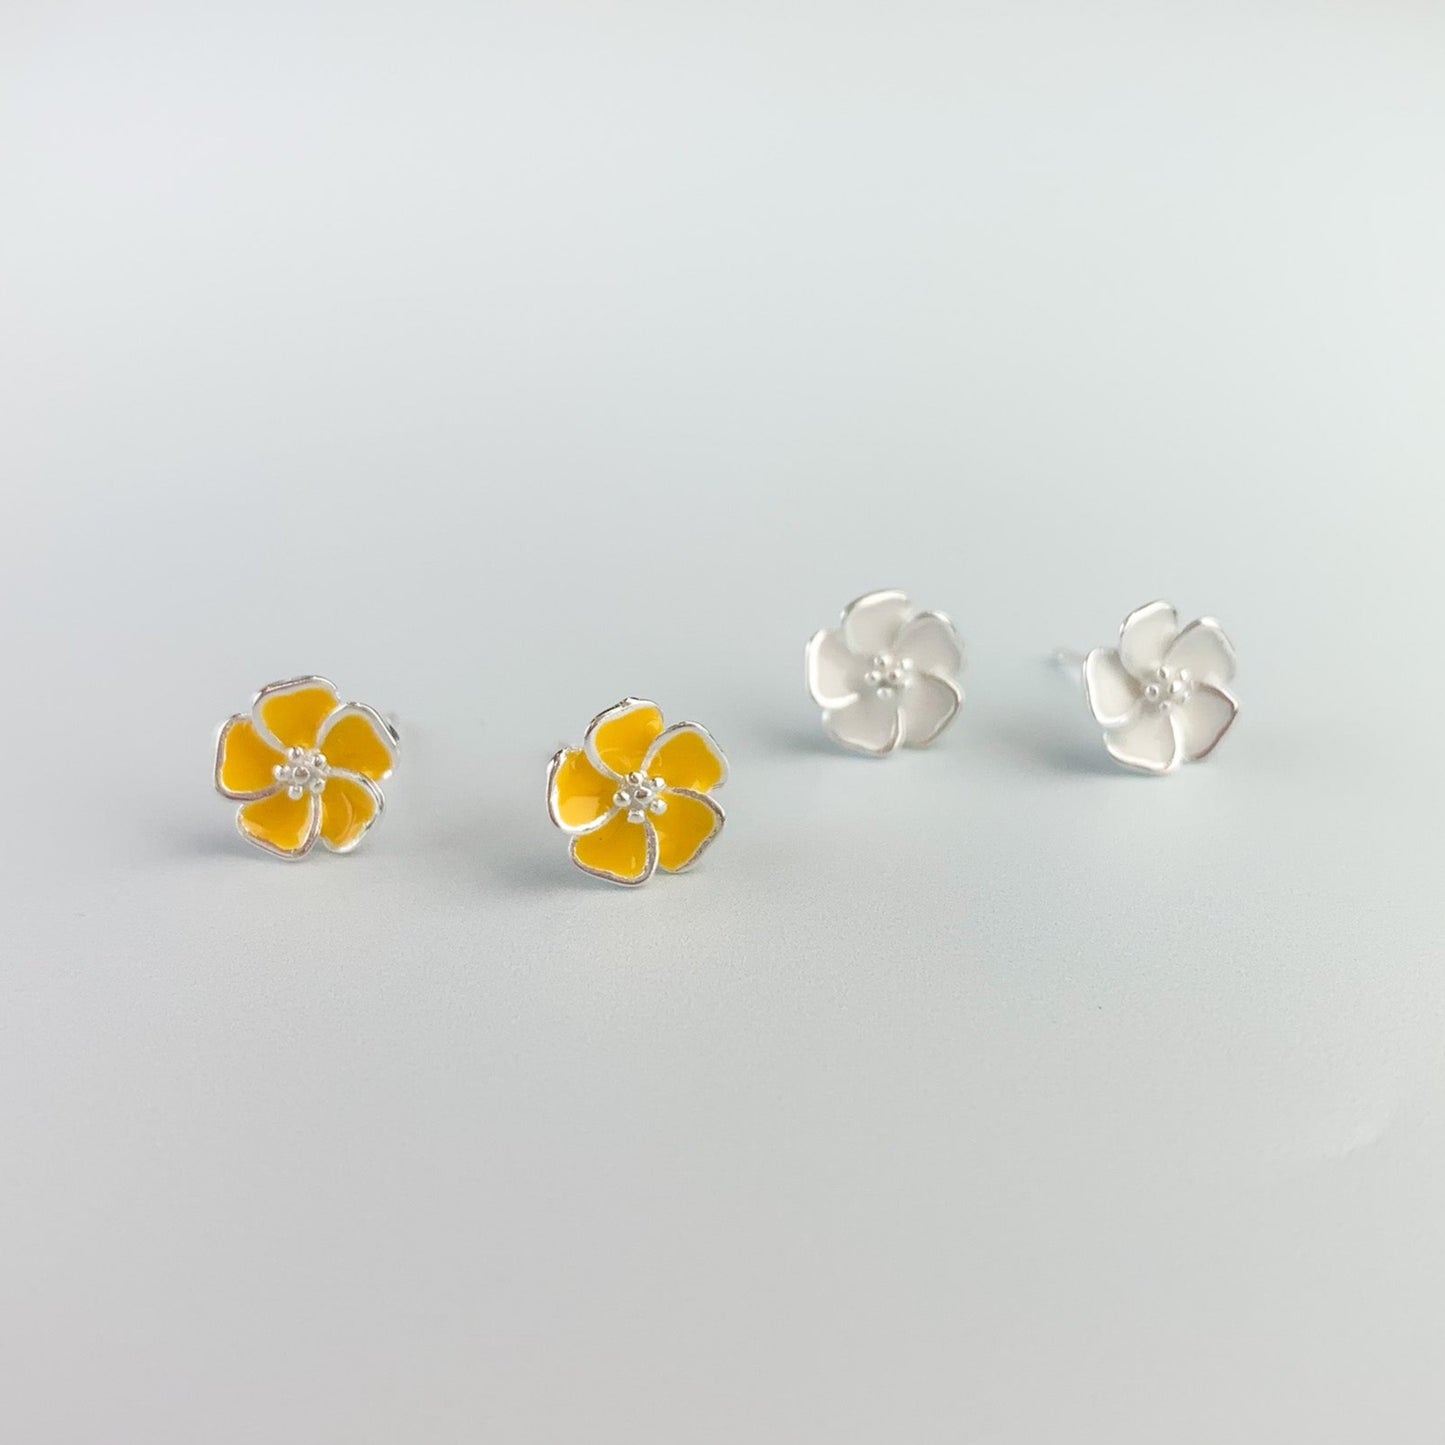 White and Yellow Flower Stud Earrings